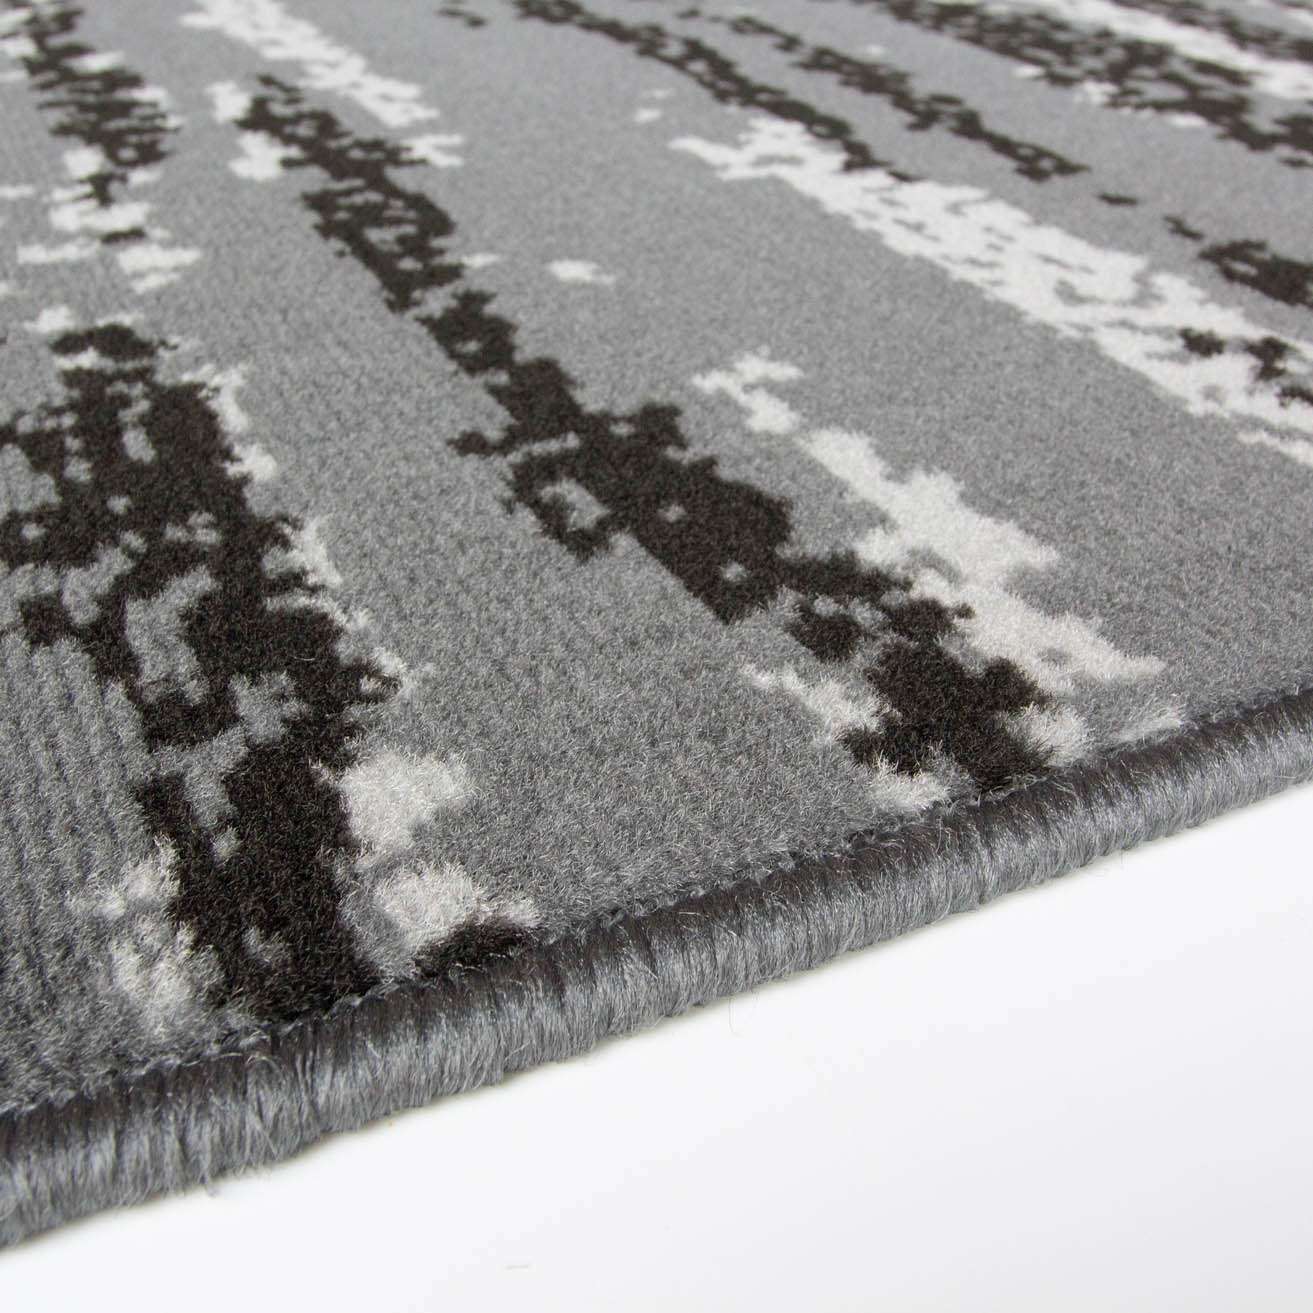 Grey Graphite Ombre Effect Living Room Rug